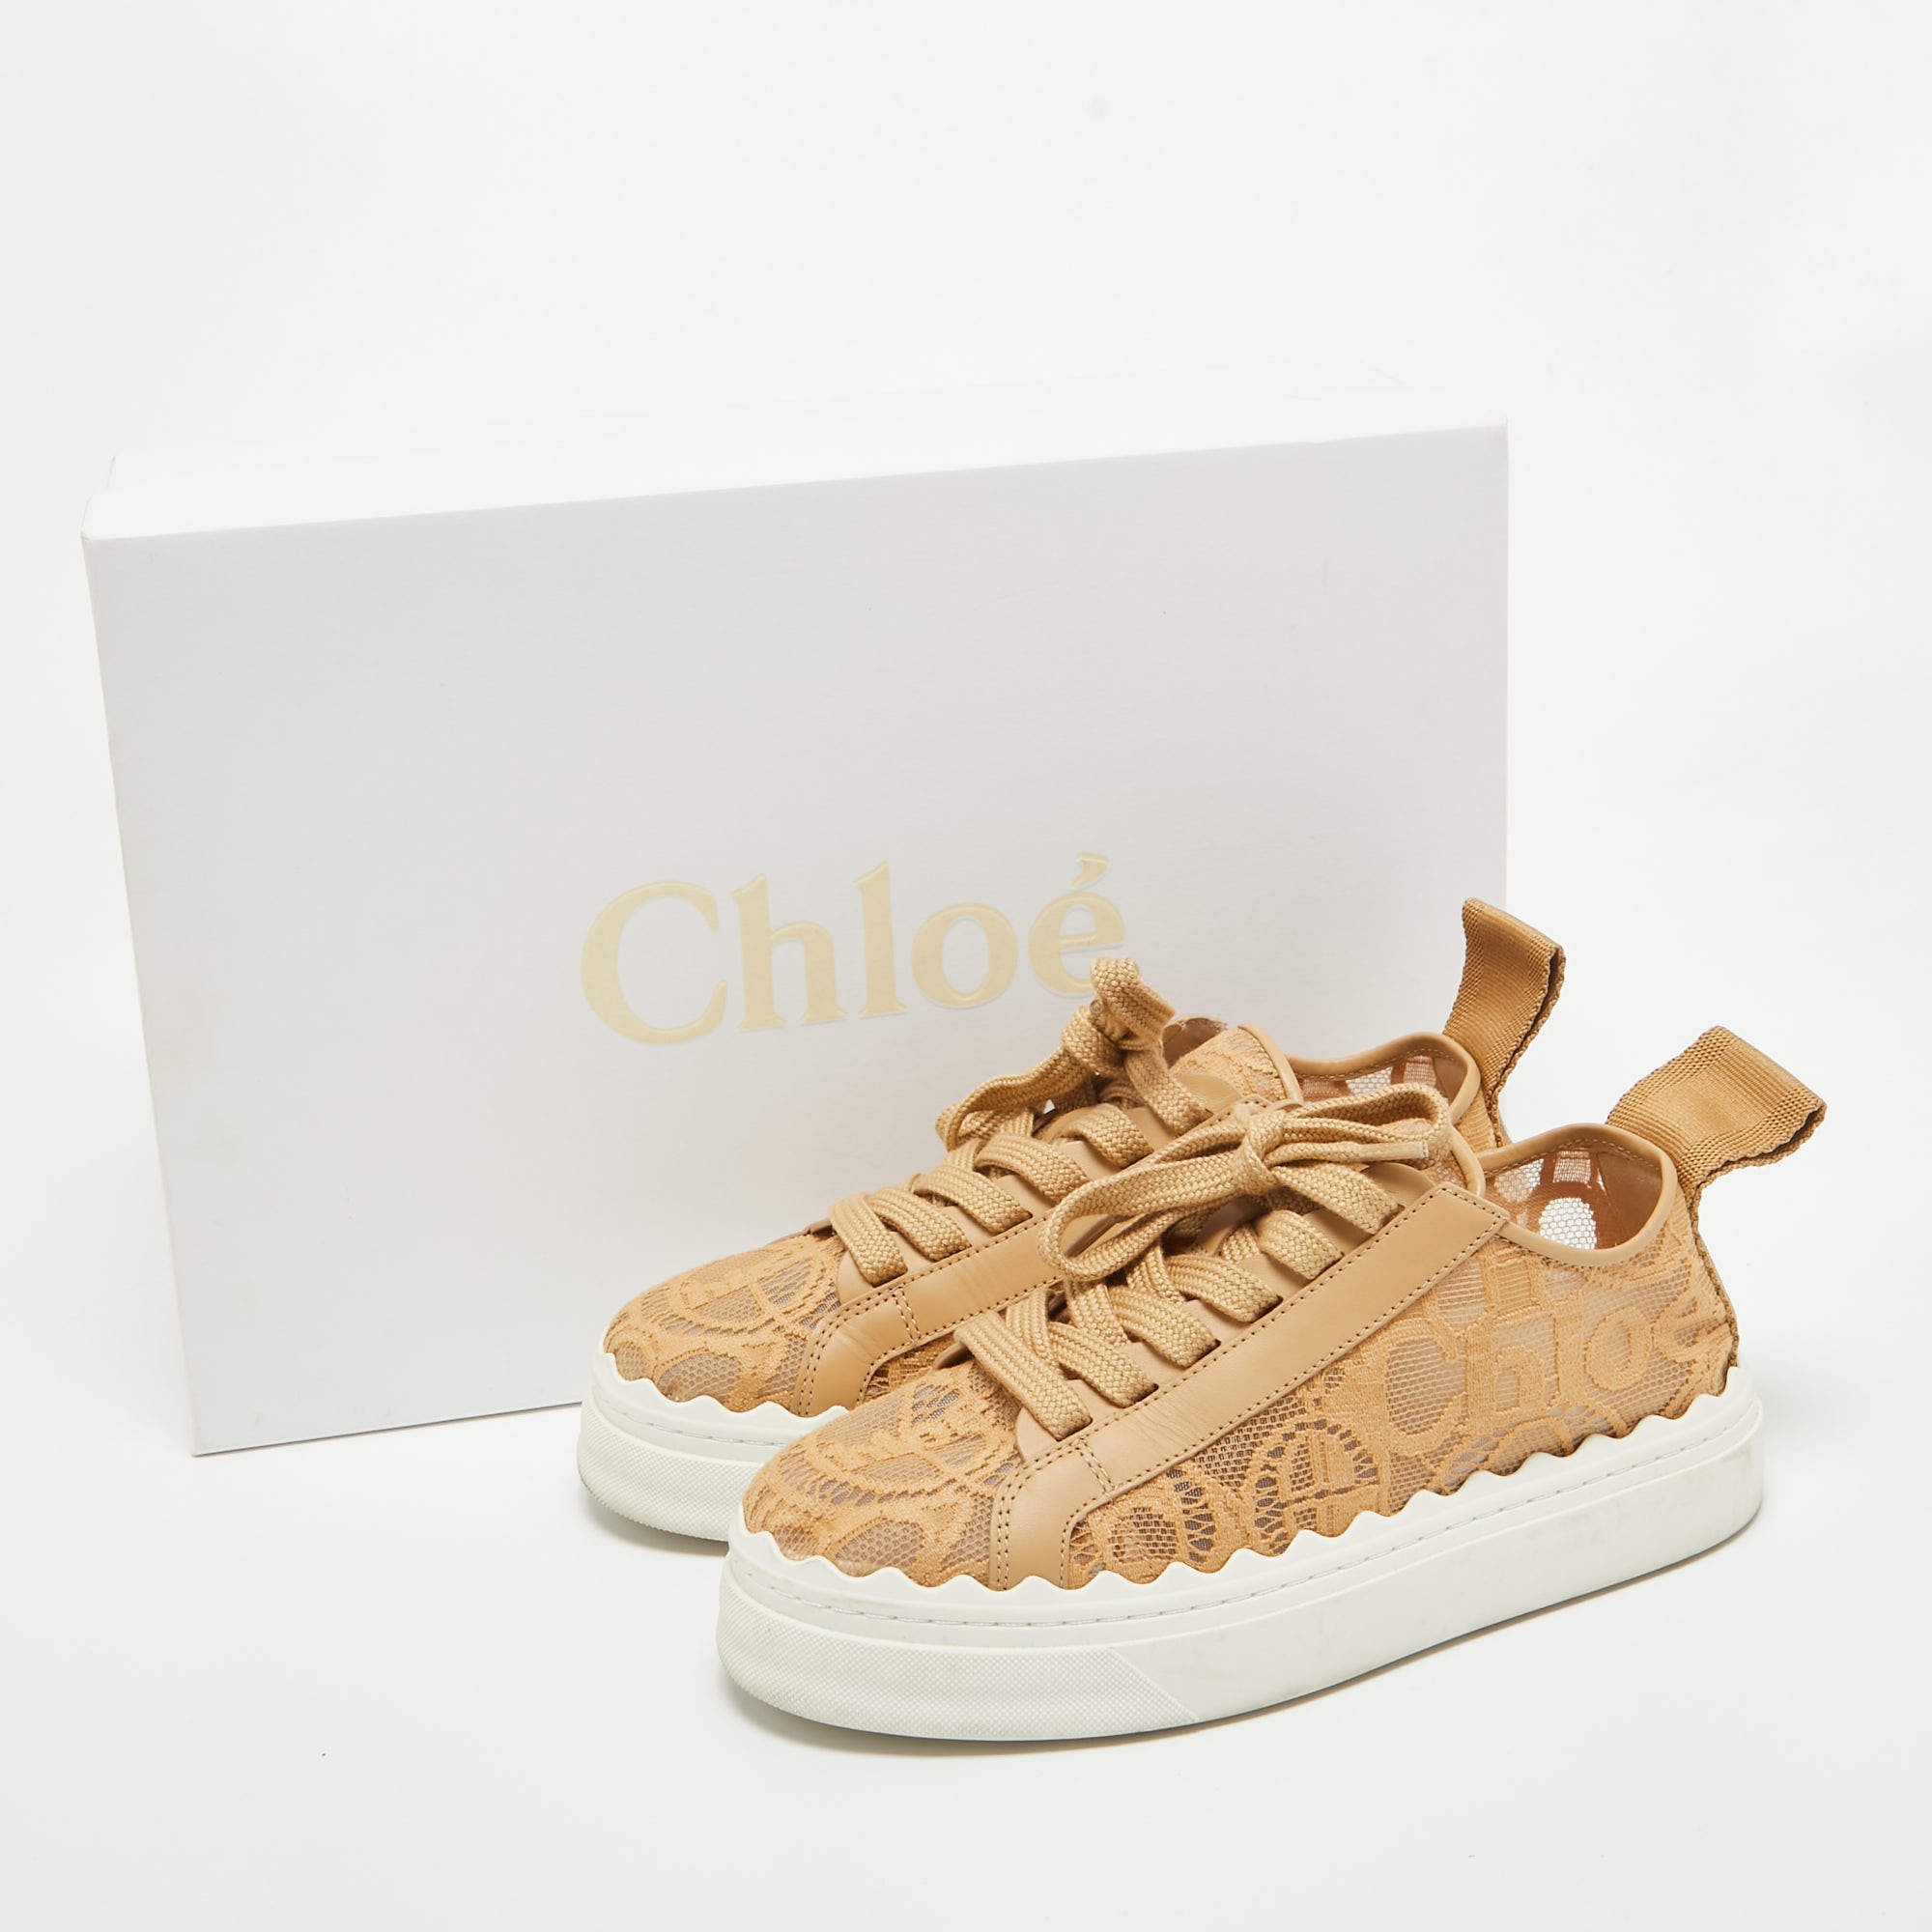 Chloé Sneakers | Chloé PT official site | Leather shoes woman, Top sneakers  women, Sneakers